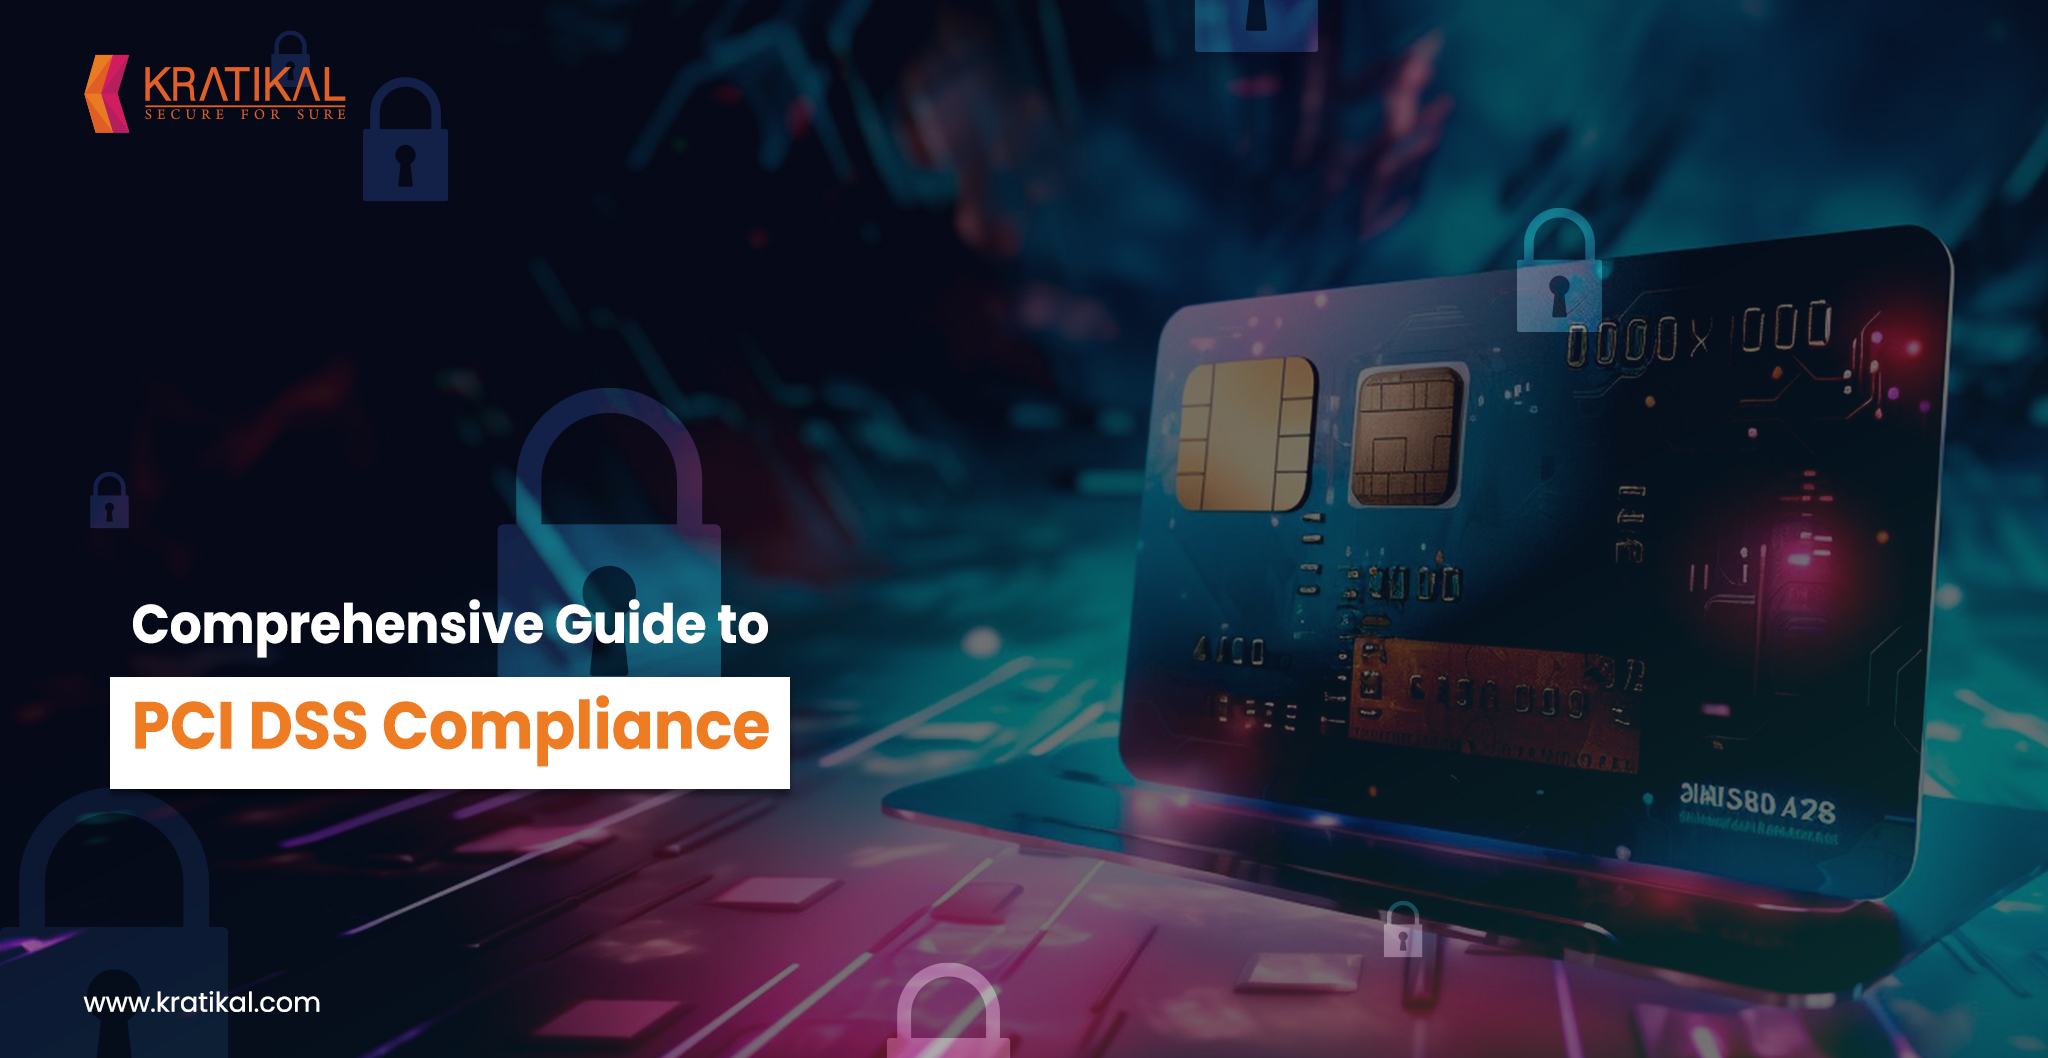 Complete Guide to PCI DSS Compliance